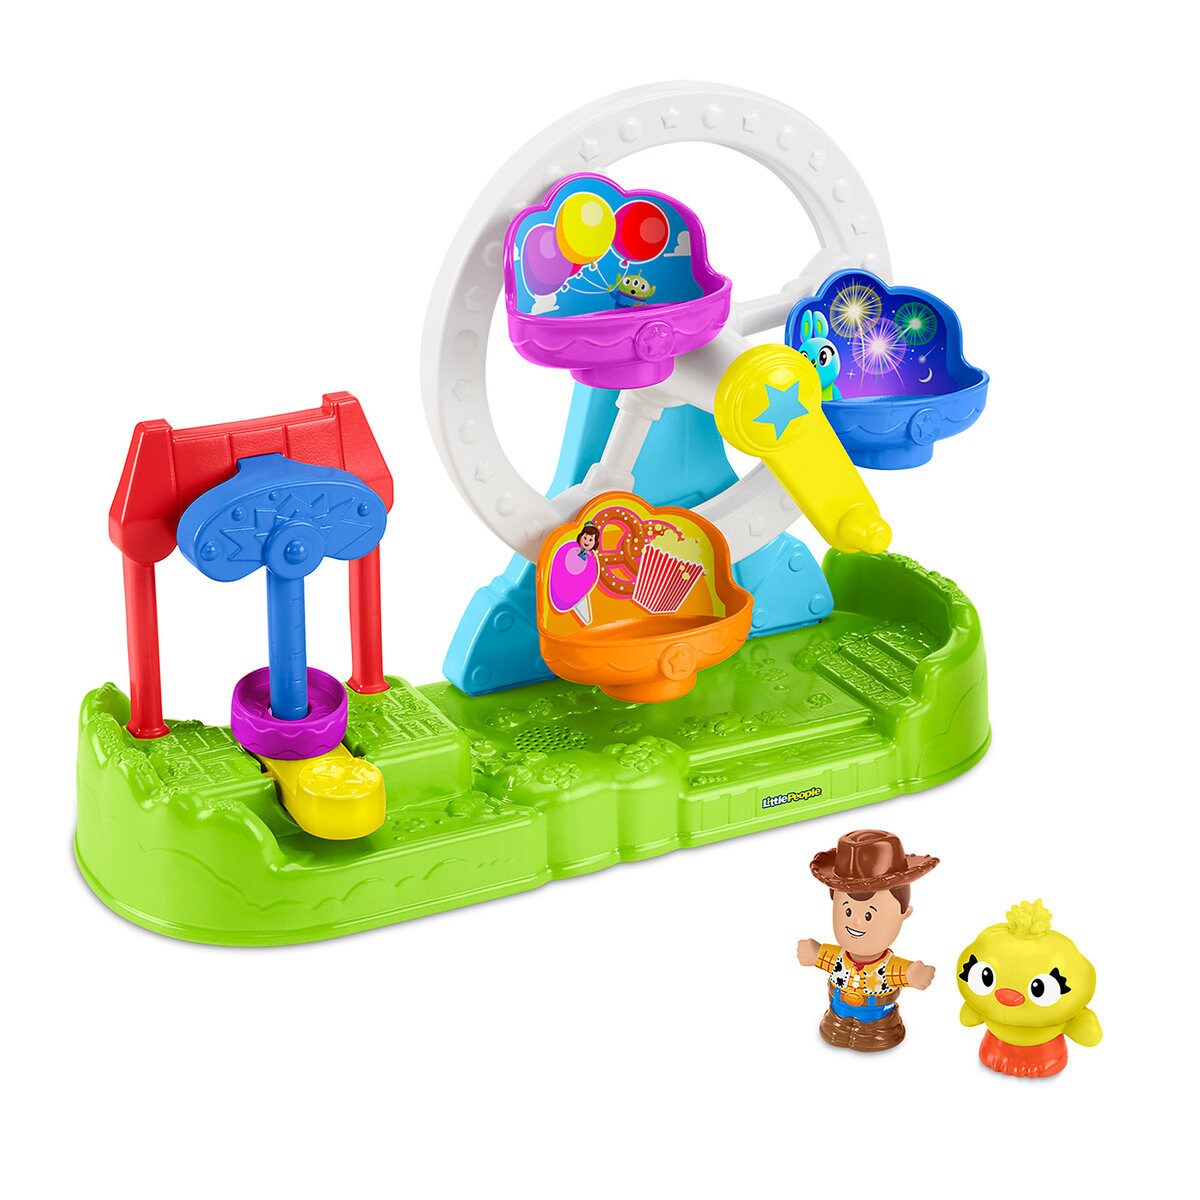 Product Image of Toy Story 4 Ferris Wheel Play Set by Little People # 1